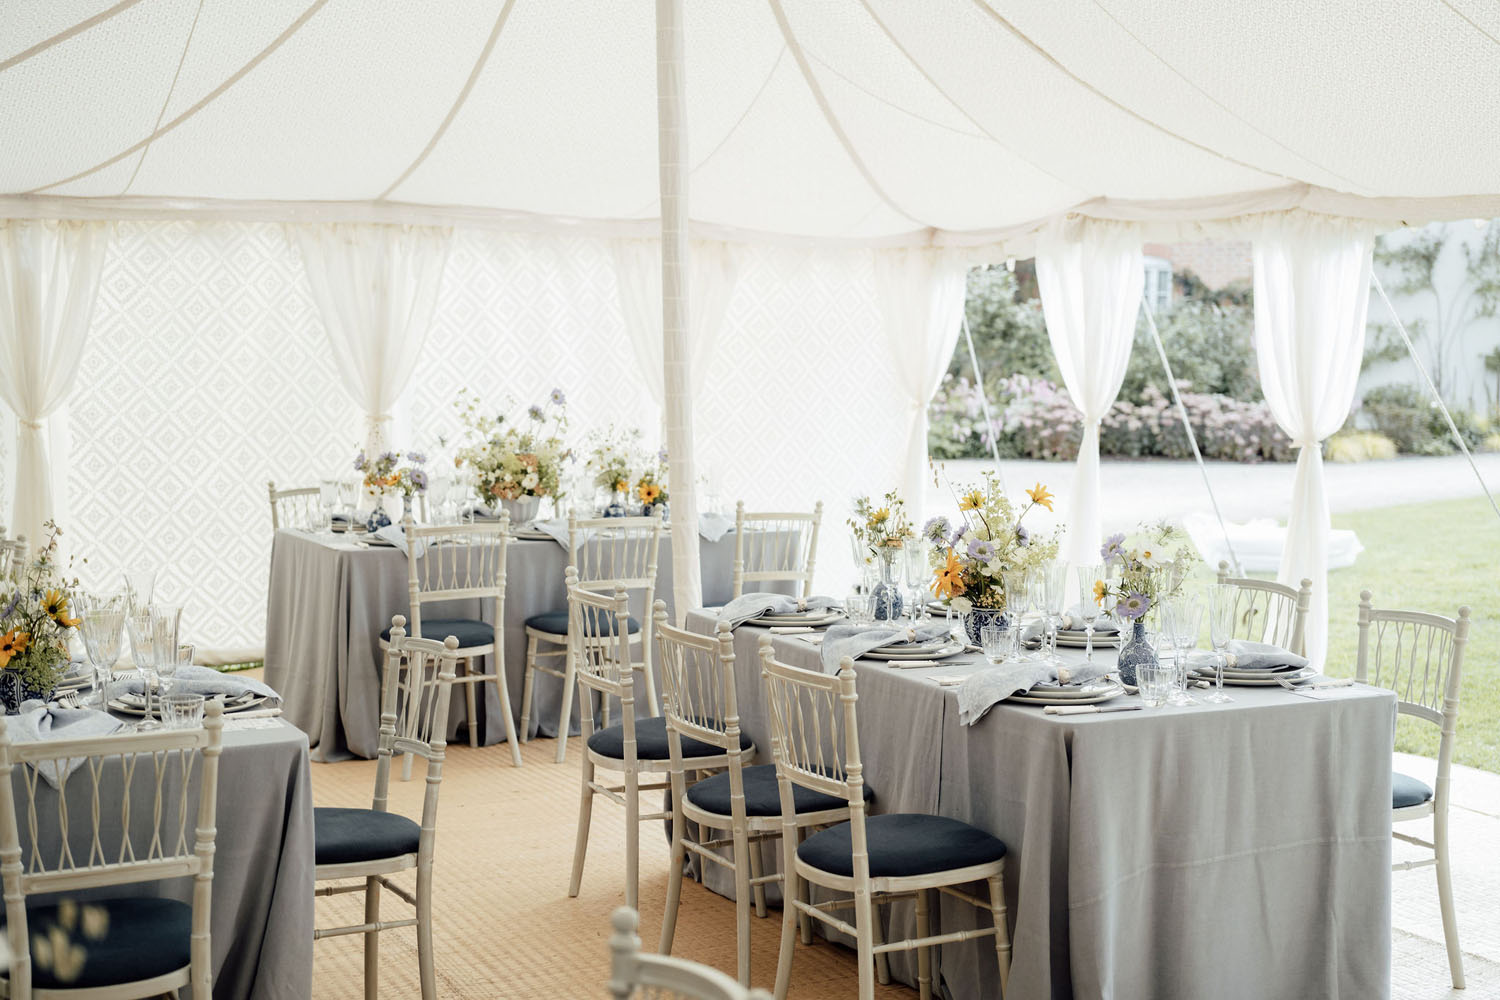 Heckfield Place, Luxury Event, Pocketful of dreams, Event Styling, 60th Birthday, Tablescape, Sunday Brunch Party, Matt Porteous, Kitten Grayson, Skye Gyngell, White and blue party